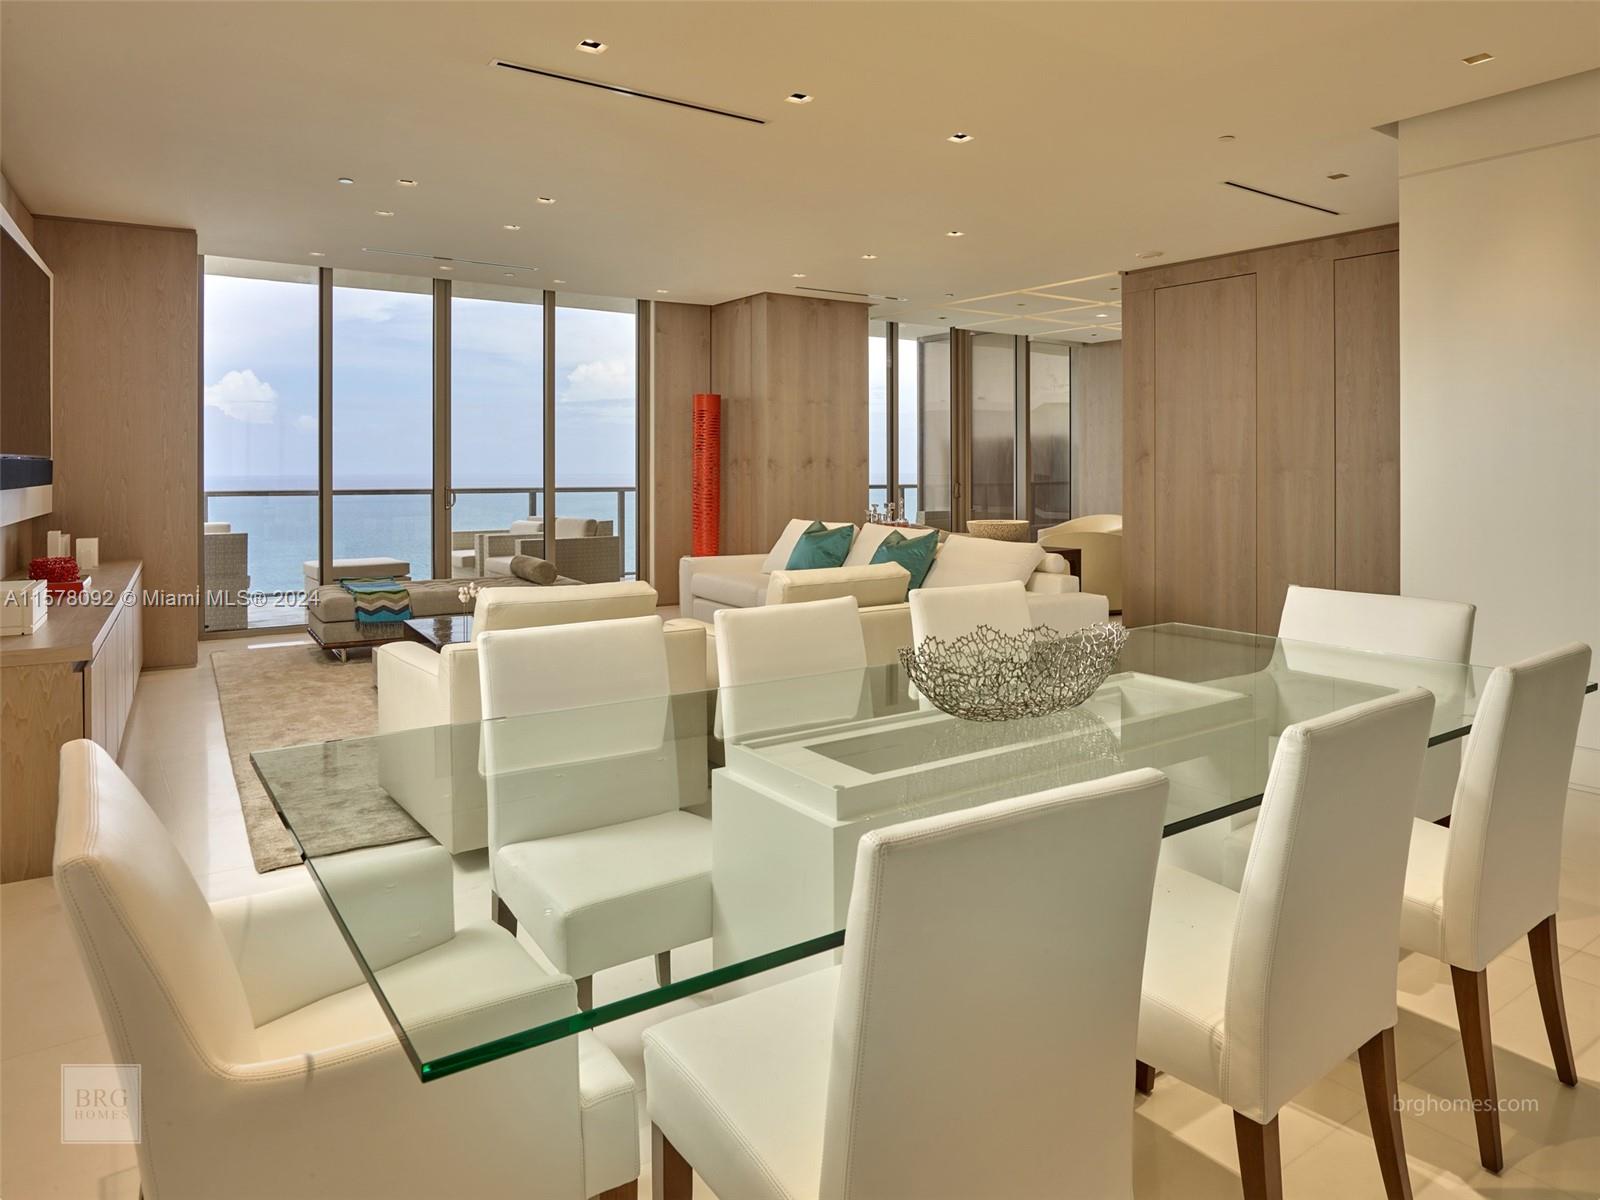 Immaculate Penthouse Residence available for Lease at St Regis Bal Harbour. This Condo features Direct Ocean and Panoramic City Views with 3 Bedrooms and 3.5 Bathrooms and 4,783 total sqft (3,514 sqft interior and 1,269 sq ft Balcony) Completely designed and built by BRG Homes, the unit includes Custom Wood Panels, Greek Thasos White Marble, unique Cove lighting, and Gorgeous Luxurious Furnishings. Enjoy the 5 Star Service that St Regis Bal Harbour has to offer.